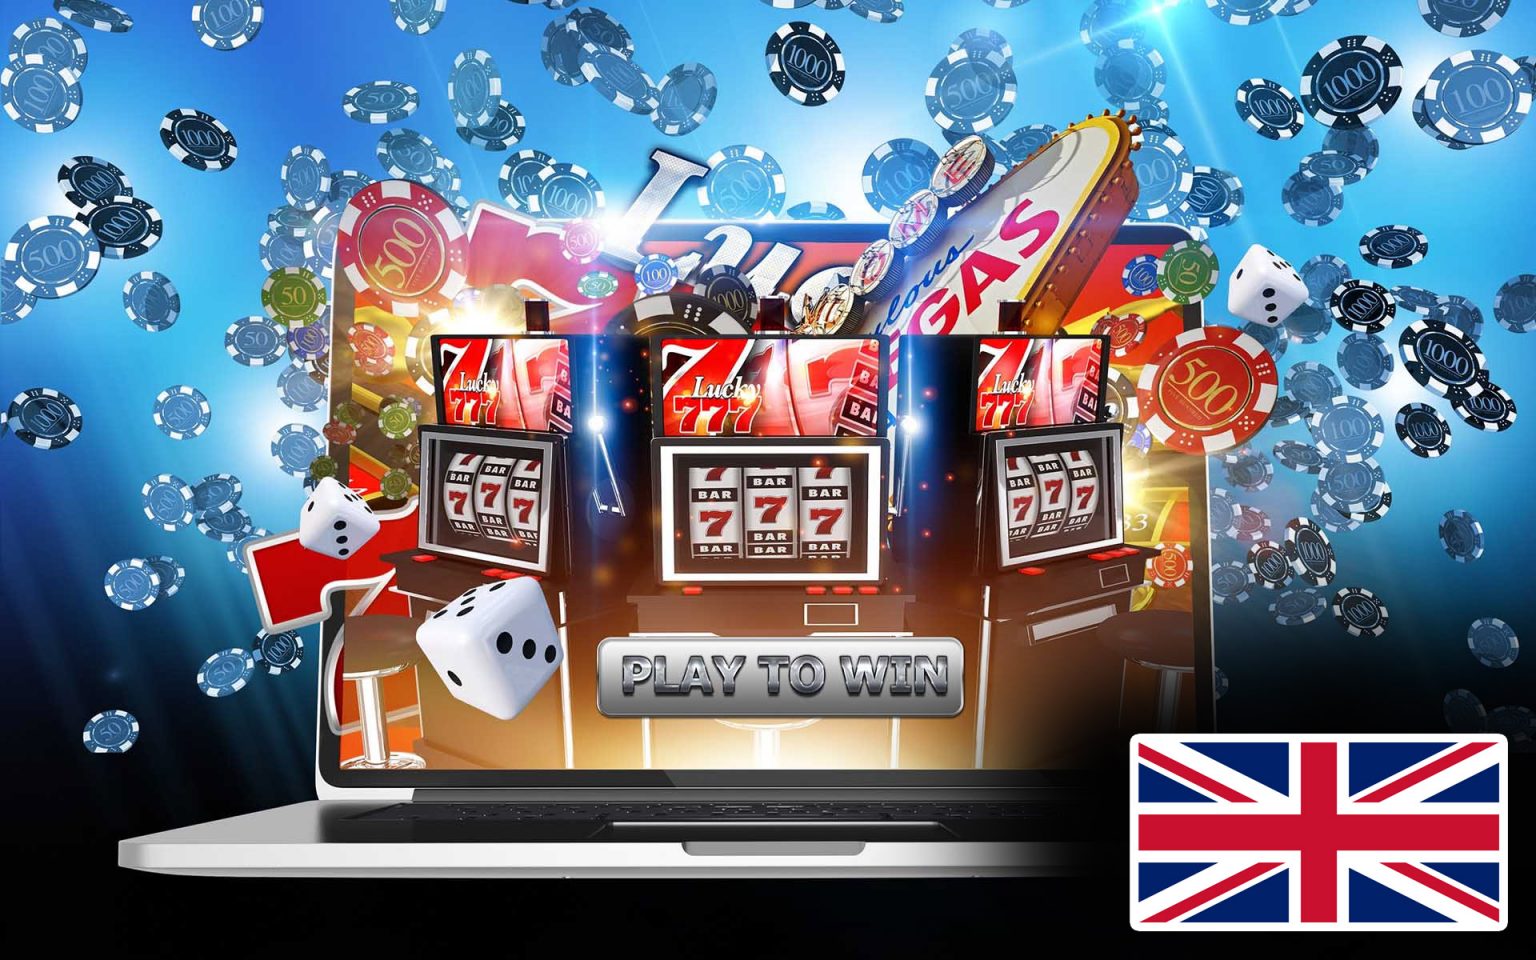 Prime Slots - The Home For Online Slots In The Uk